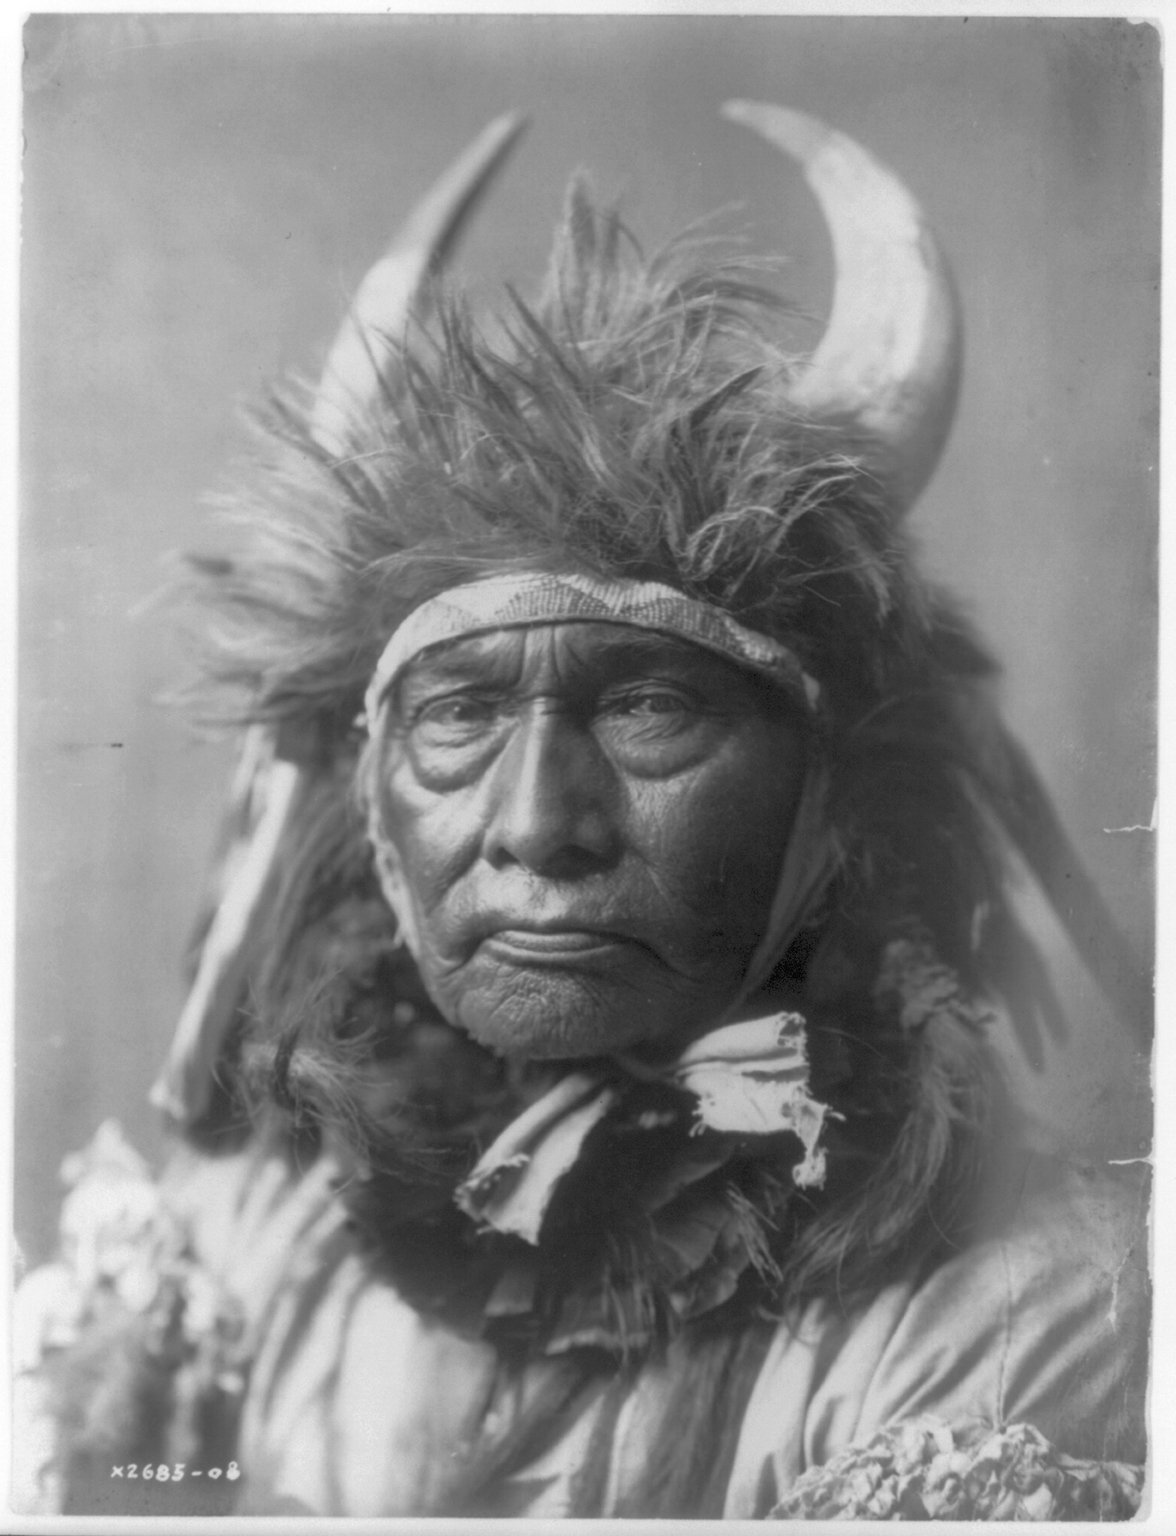 Native American chief with bull horns headpiece